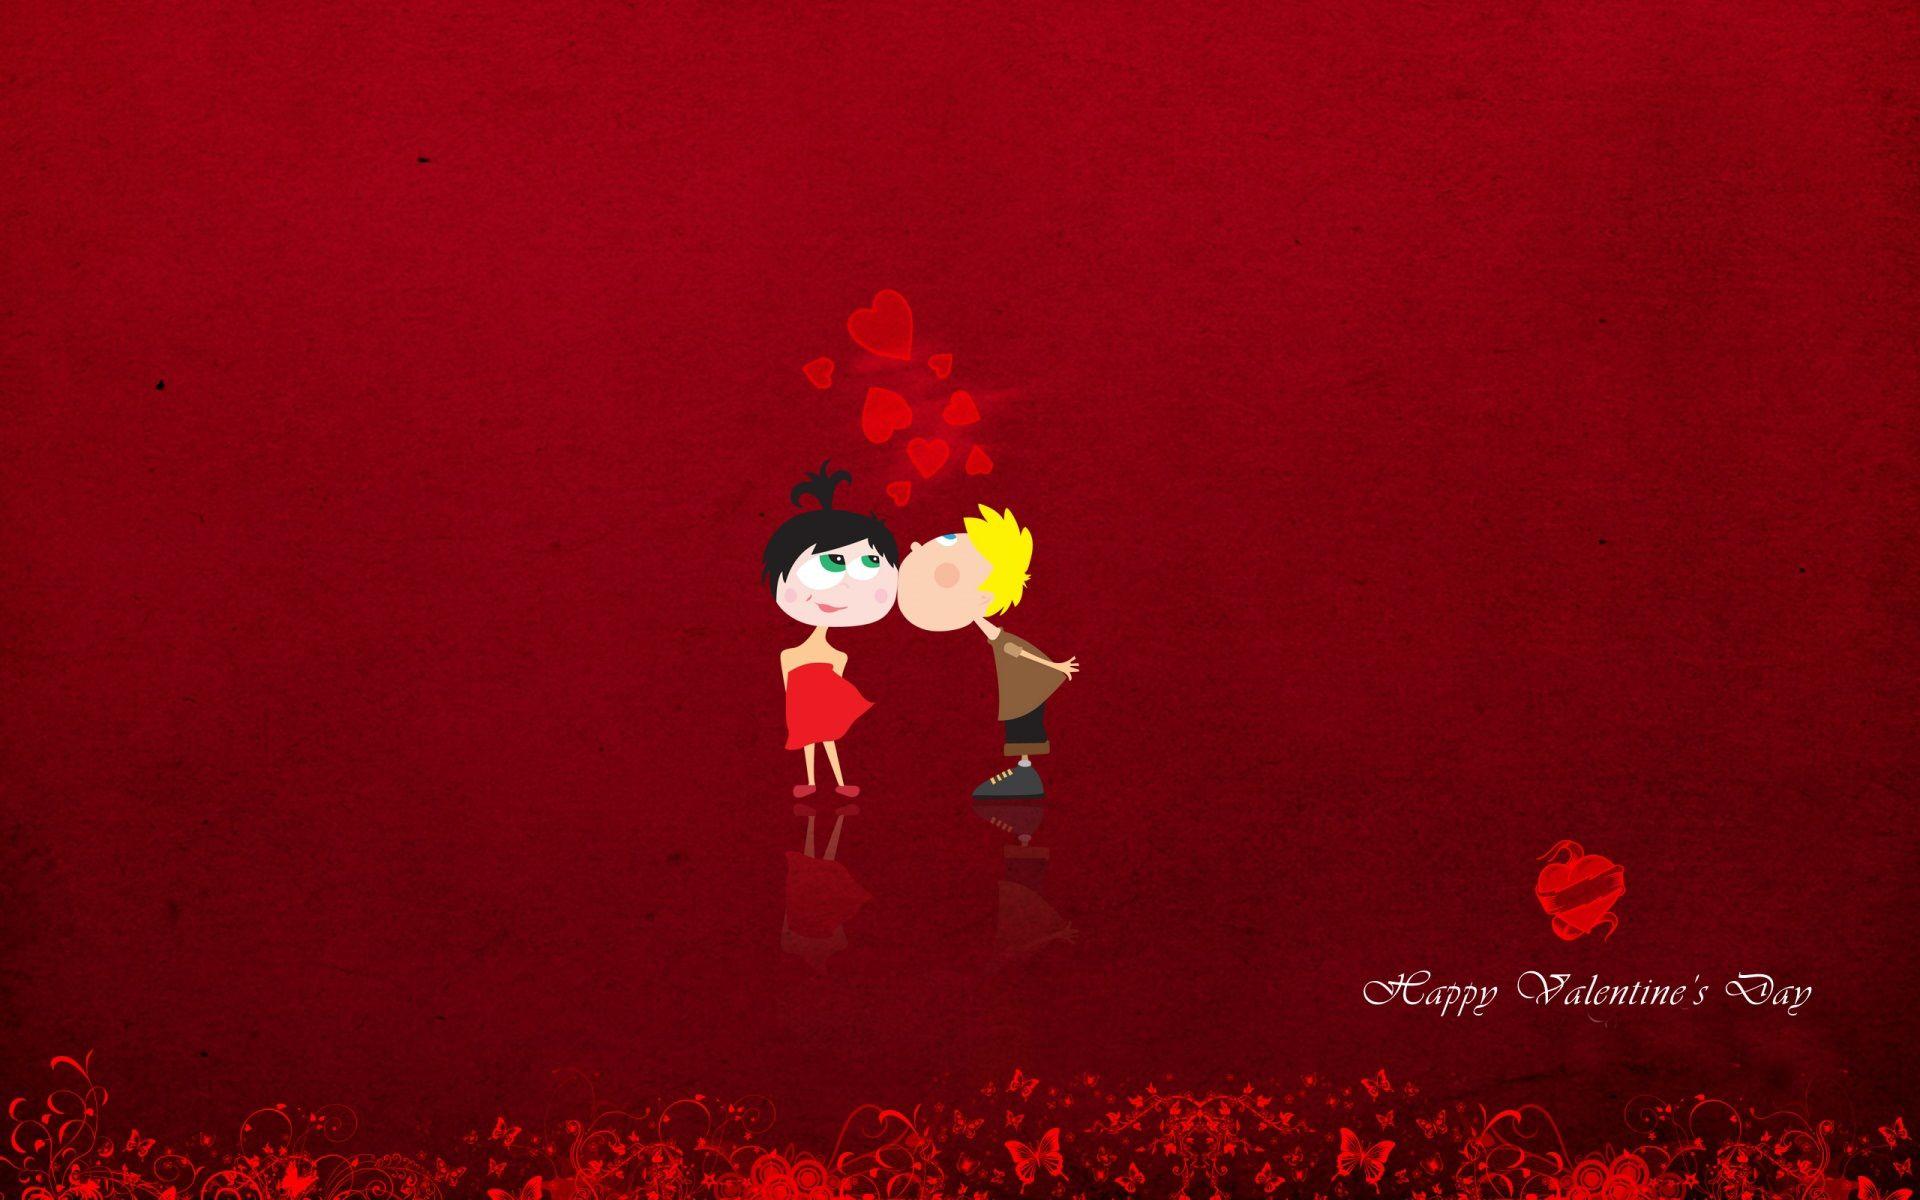 Abstract Kiss Day Wallpaper. Happy valentines day image, Happy